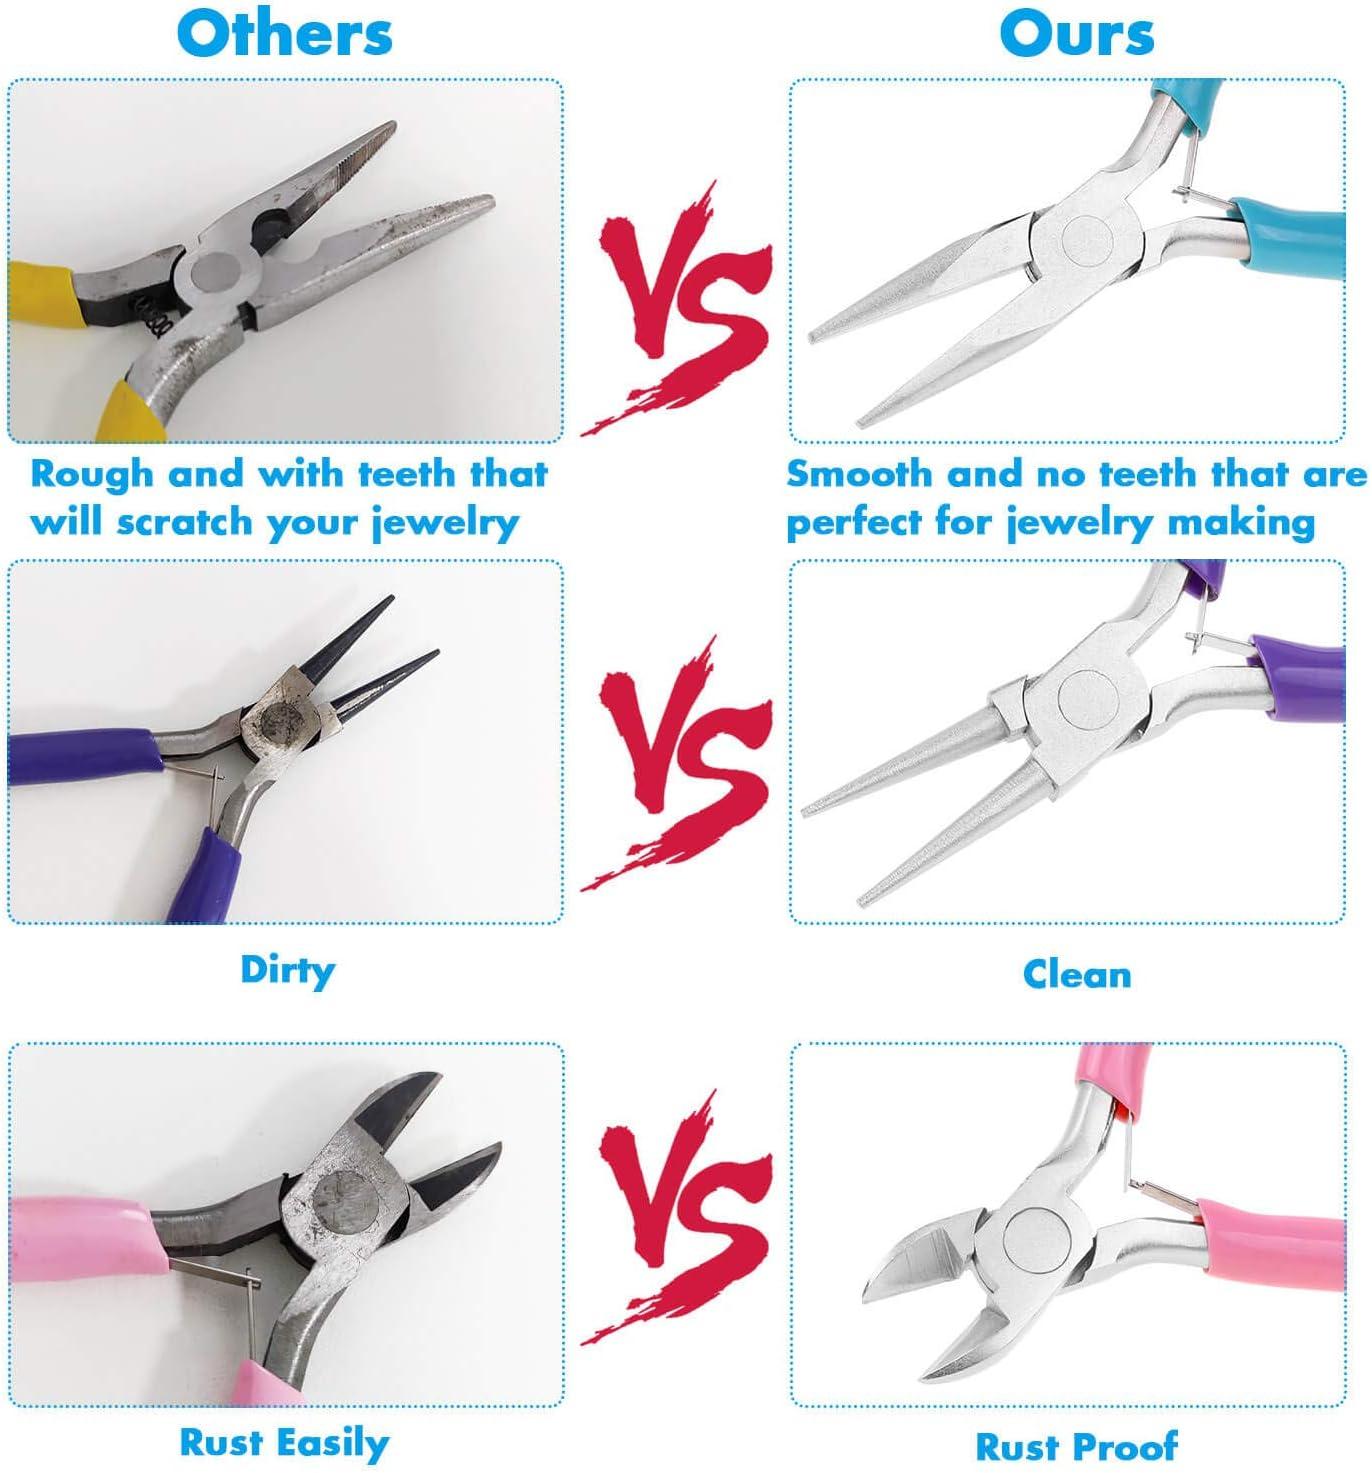 A guide to speciality pliers and cutters used for jewelry making